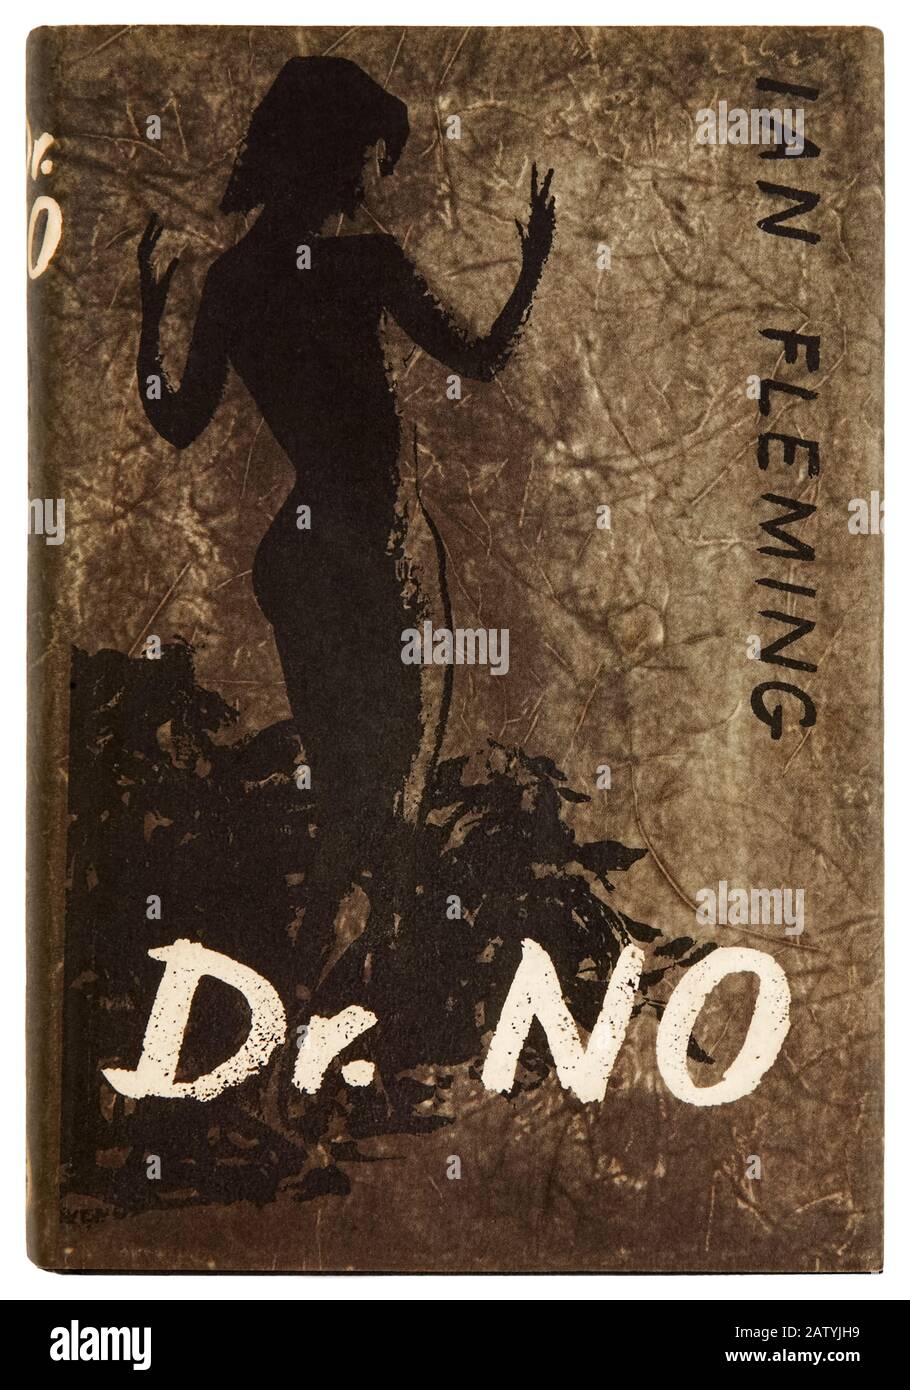 Dr. No by Ian Fleming (1908 – 1964) the sixth novel to feature British Secret Service agent 007, James Bond and the first to be adapted for the big screen in 1962. Photograph of 1958 first edition front cover featuring artwork by Pat Marriott (1920-2002). Stock Photo